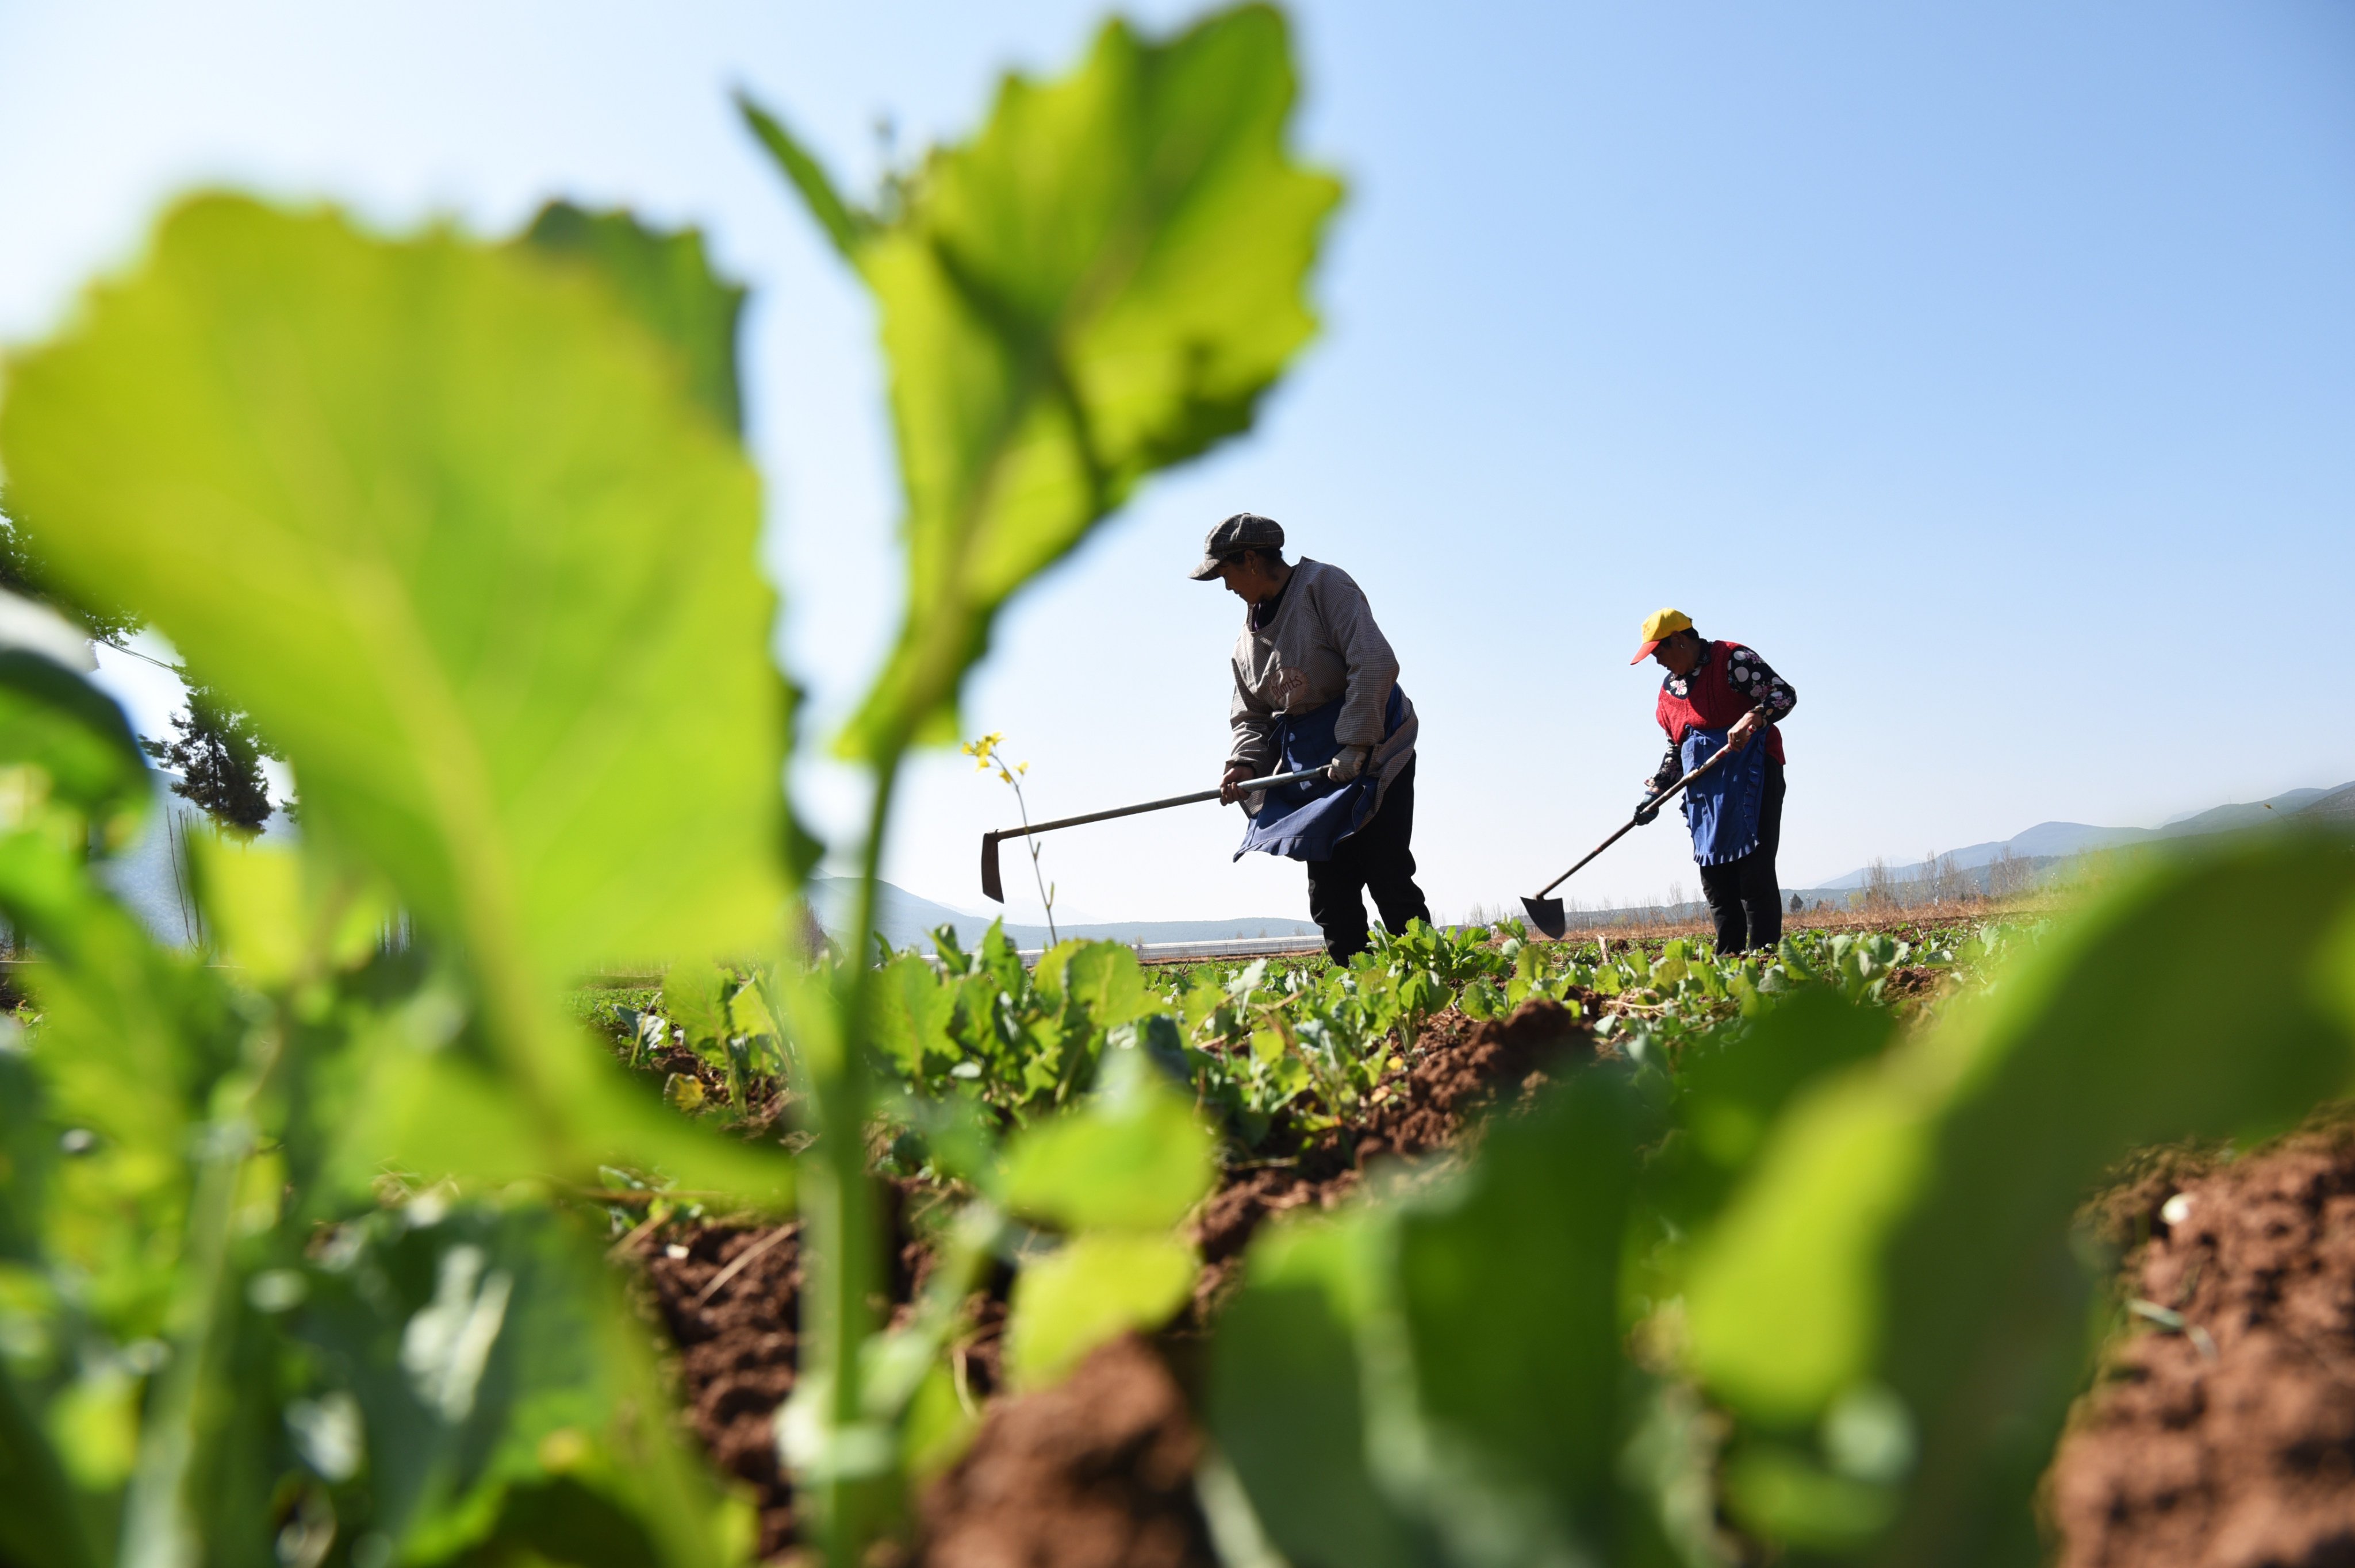 ‘In China alone, agriculture is responsible for around the same amount of emissions annually as the entire aviation sector globally,’ said Morris. Photo: Xinhua